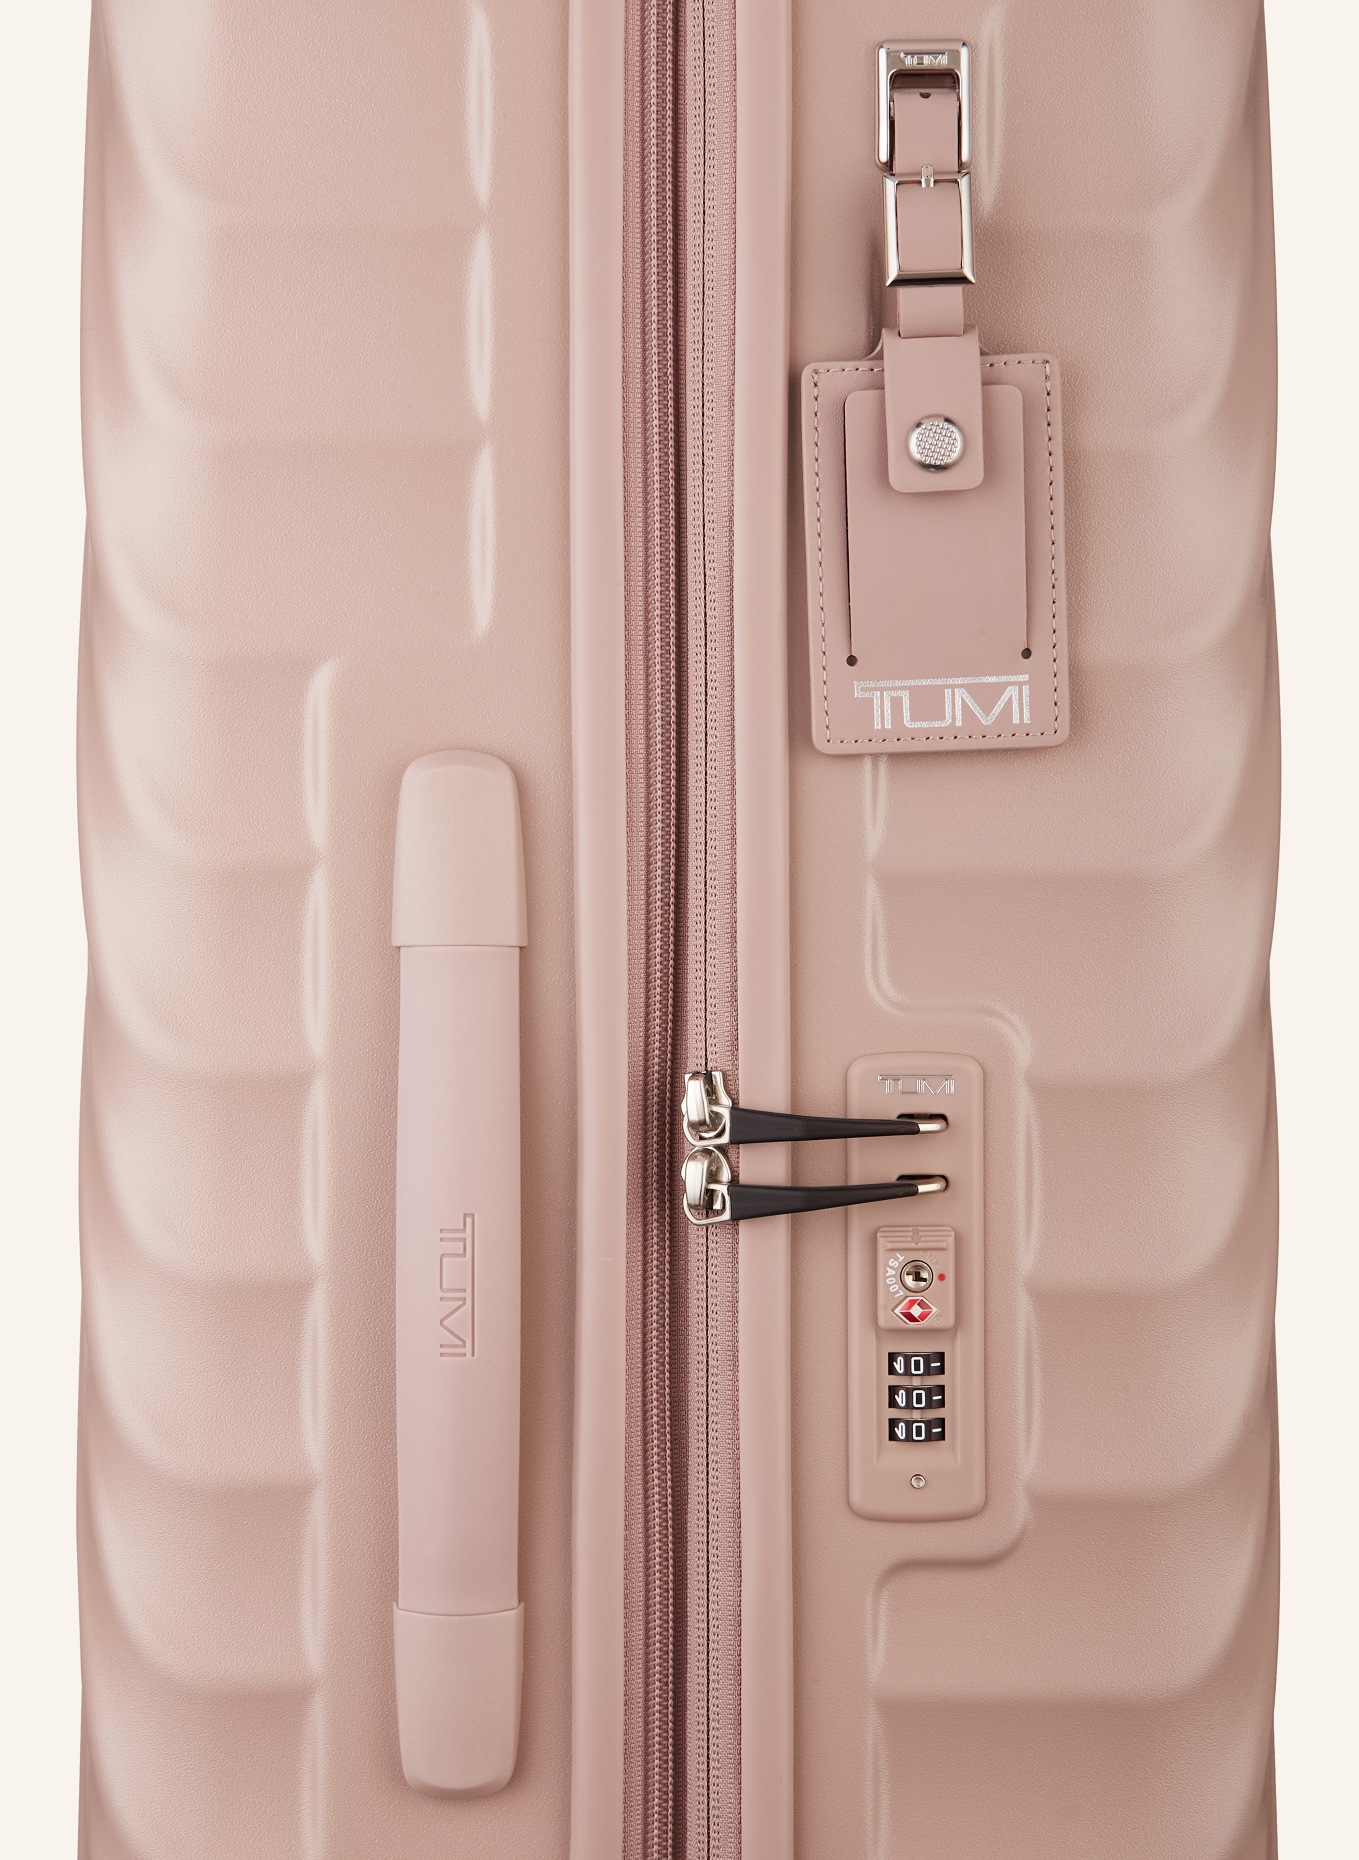 TUMI 19 DEGREE Trolley EXTENDED TRIP EXPANDABLE 4 WHEELED PACKING CASE, Farbe: ROSÉ (Bild 3)